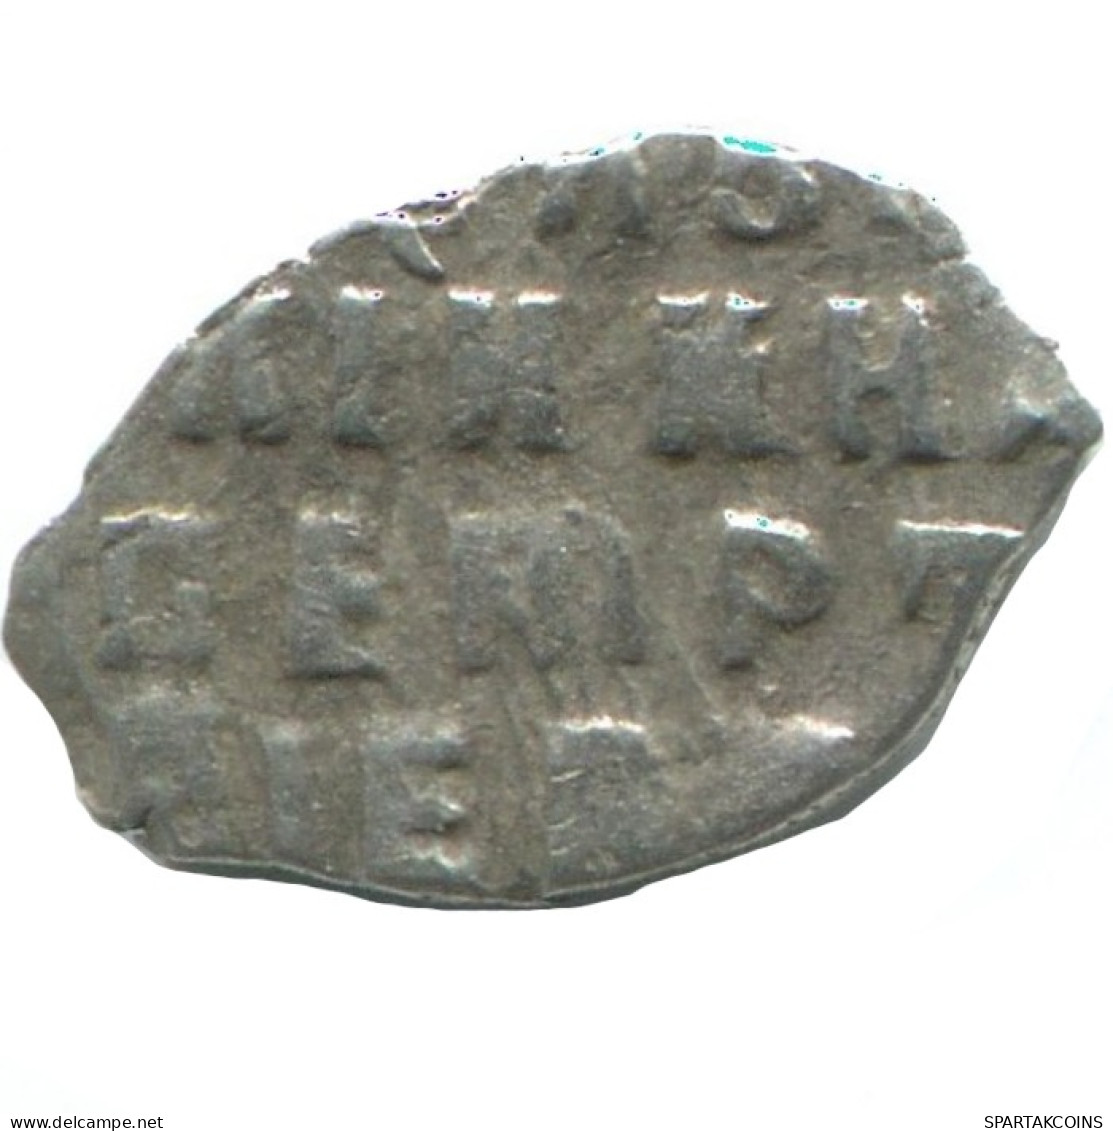 RUSSIE RUSSIA 1702 KOPECK PETER I KADASHEVSKY Mint MOSCOW ARGENT 0.3g/8mm #AB478.10.F.A - Russia